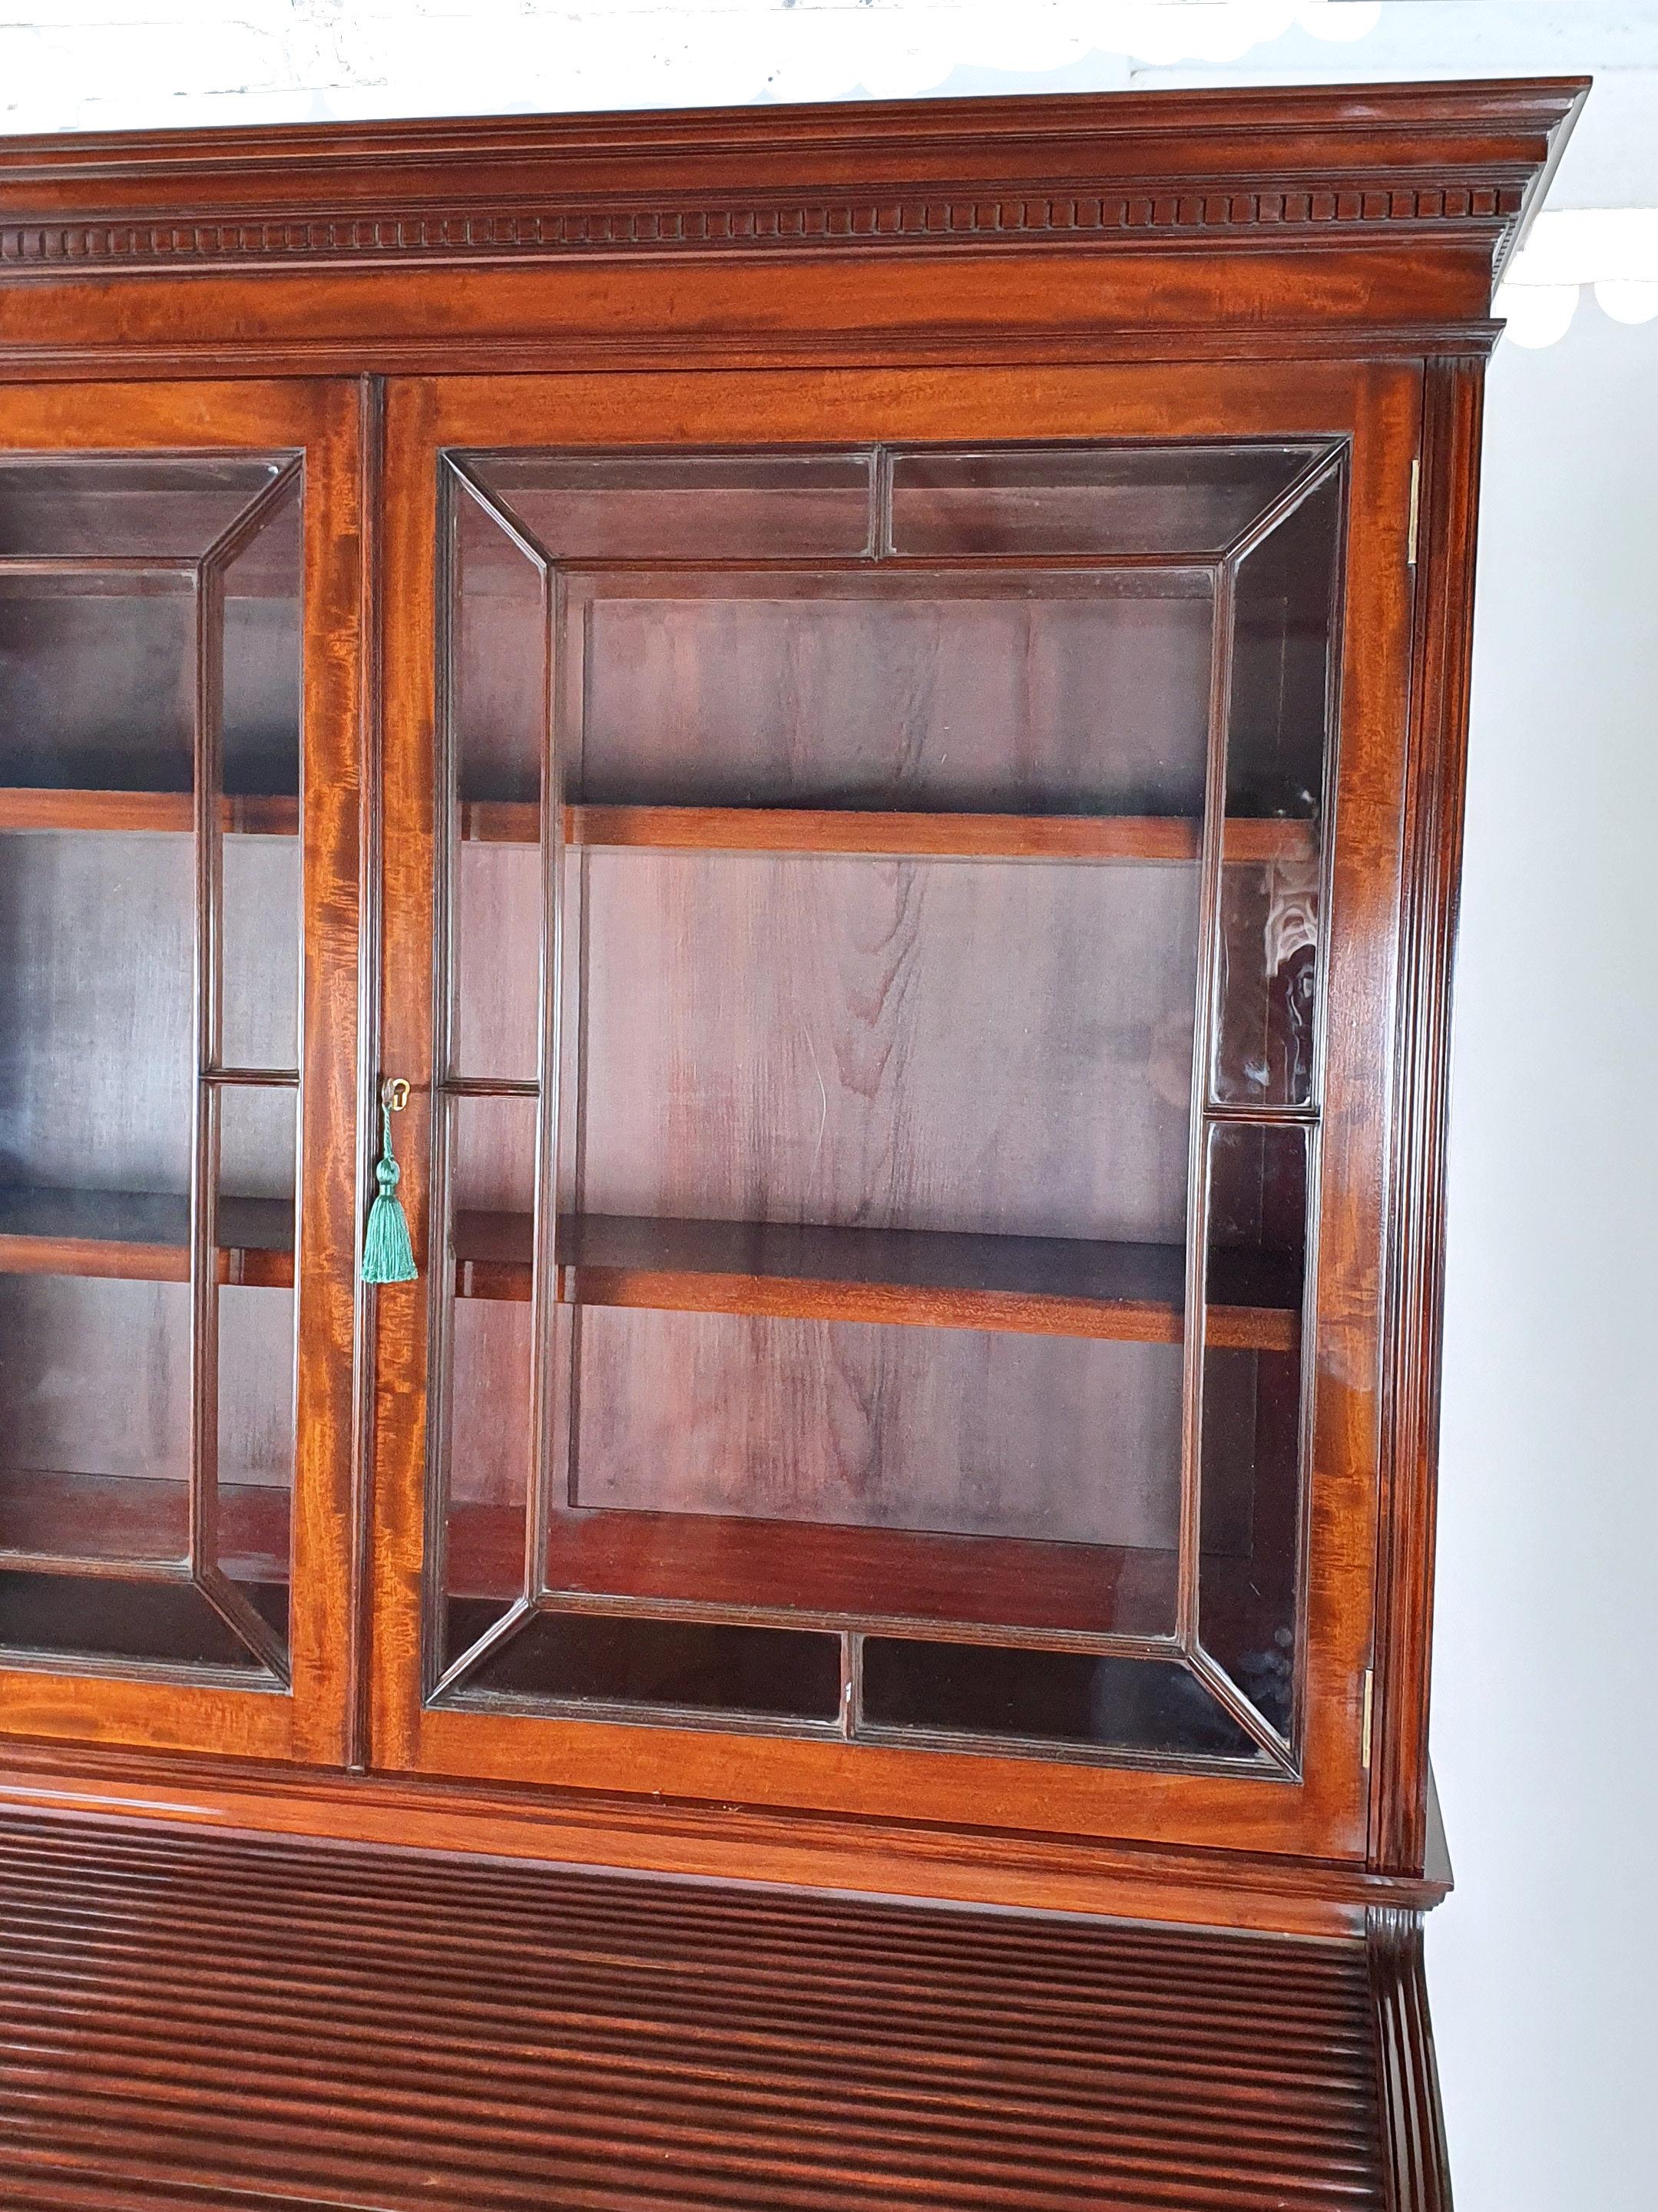 This very handsome and superb quality Victorian figured mahogany cylinder bookcase supported on a pedestal base. The 2 door glazed top features 2 adjustable shelves with the original lock and key. The bottom section features a pedestal desk with a